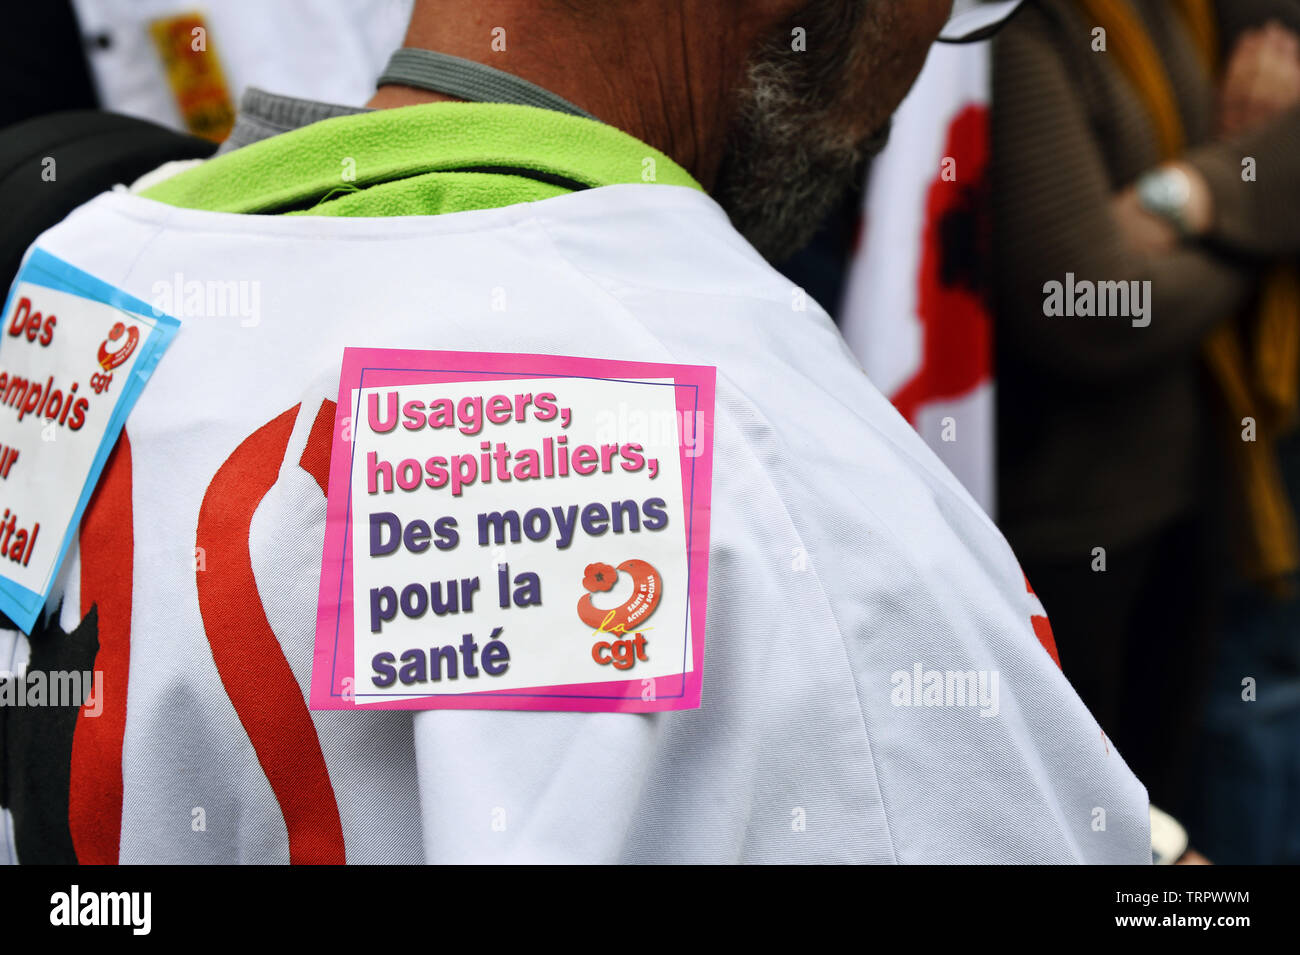 Emergency Health care workers protest in Paris - France Stock Photo